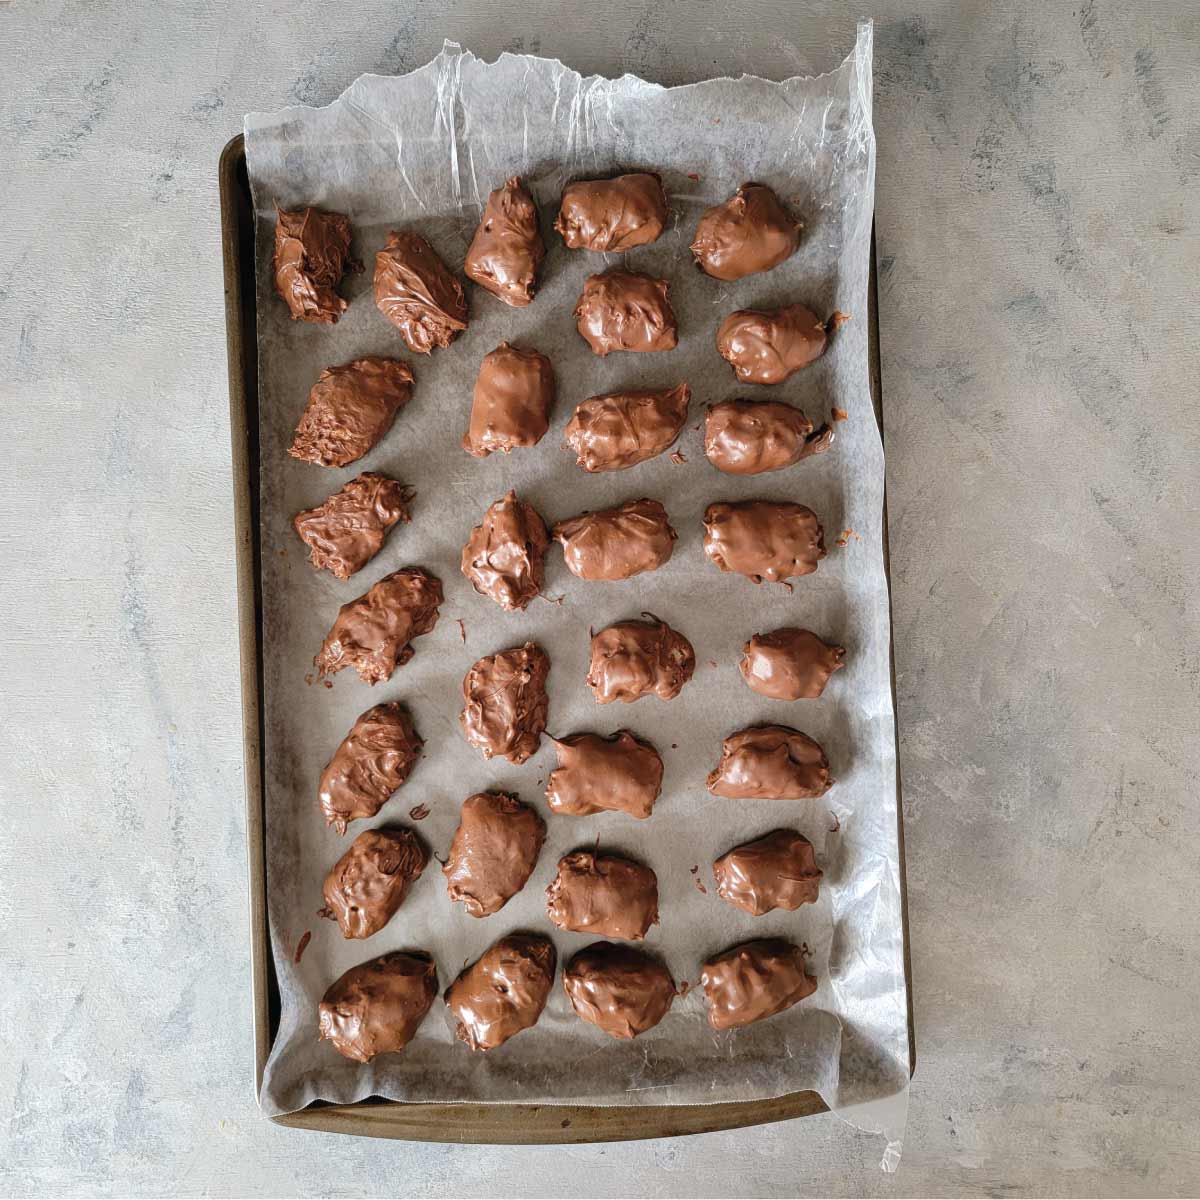 Eggs on wax paper on a baking sheet after coating in chocolate.